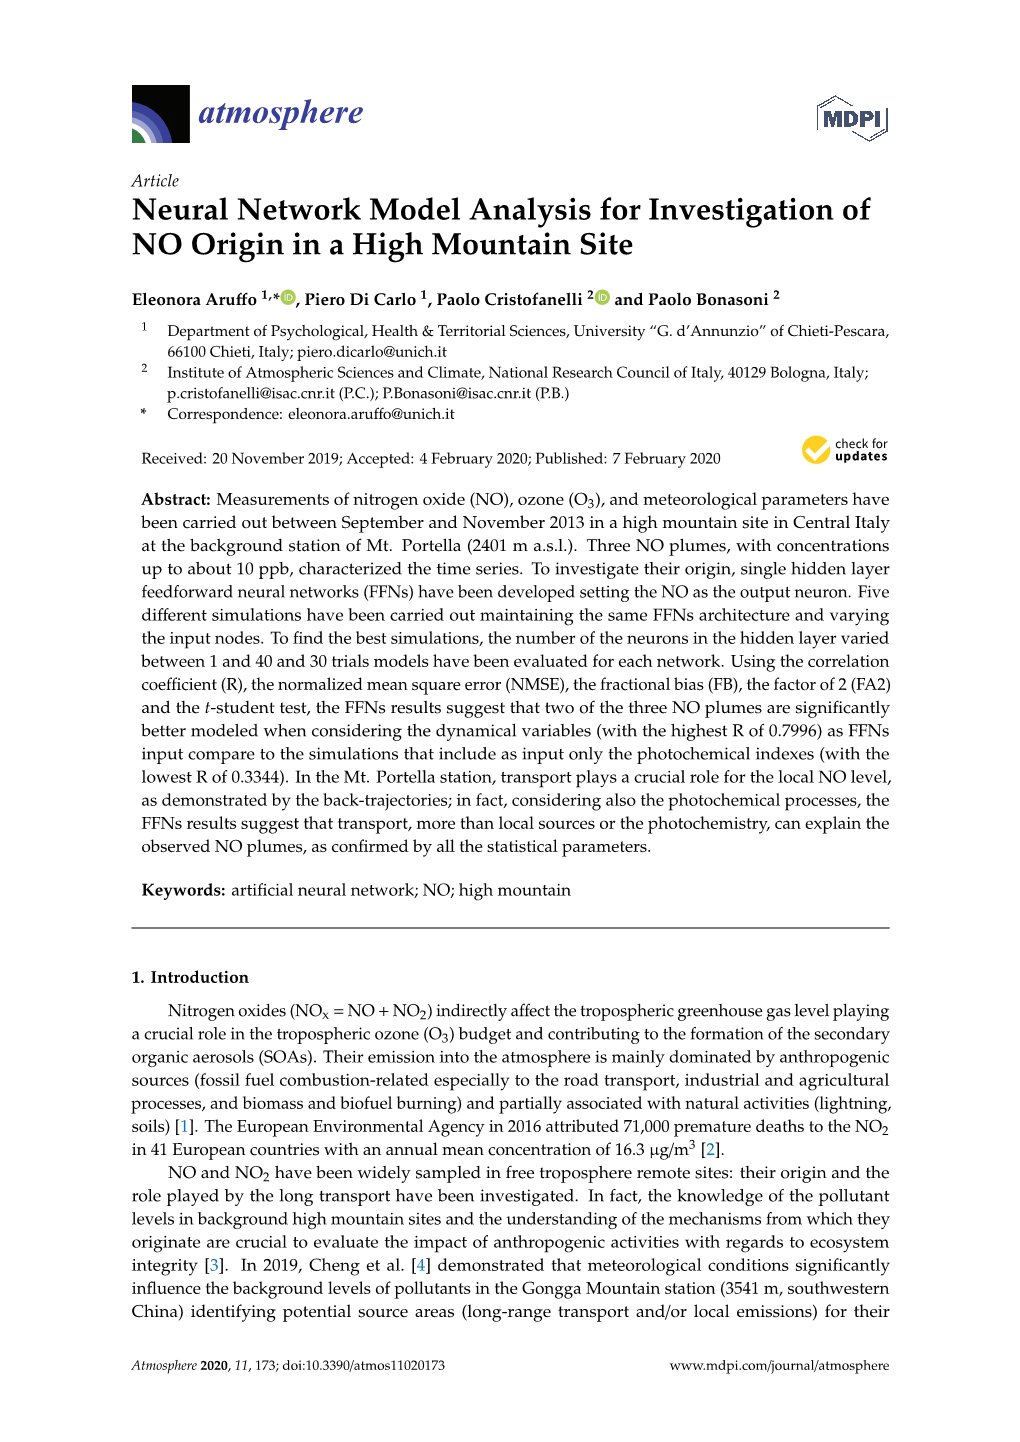 Neural Network Model Analysis for Investigation of NO Origin in a High Mountain Site